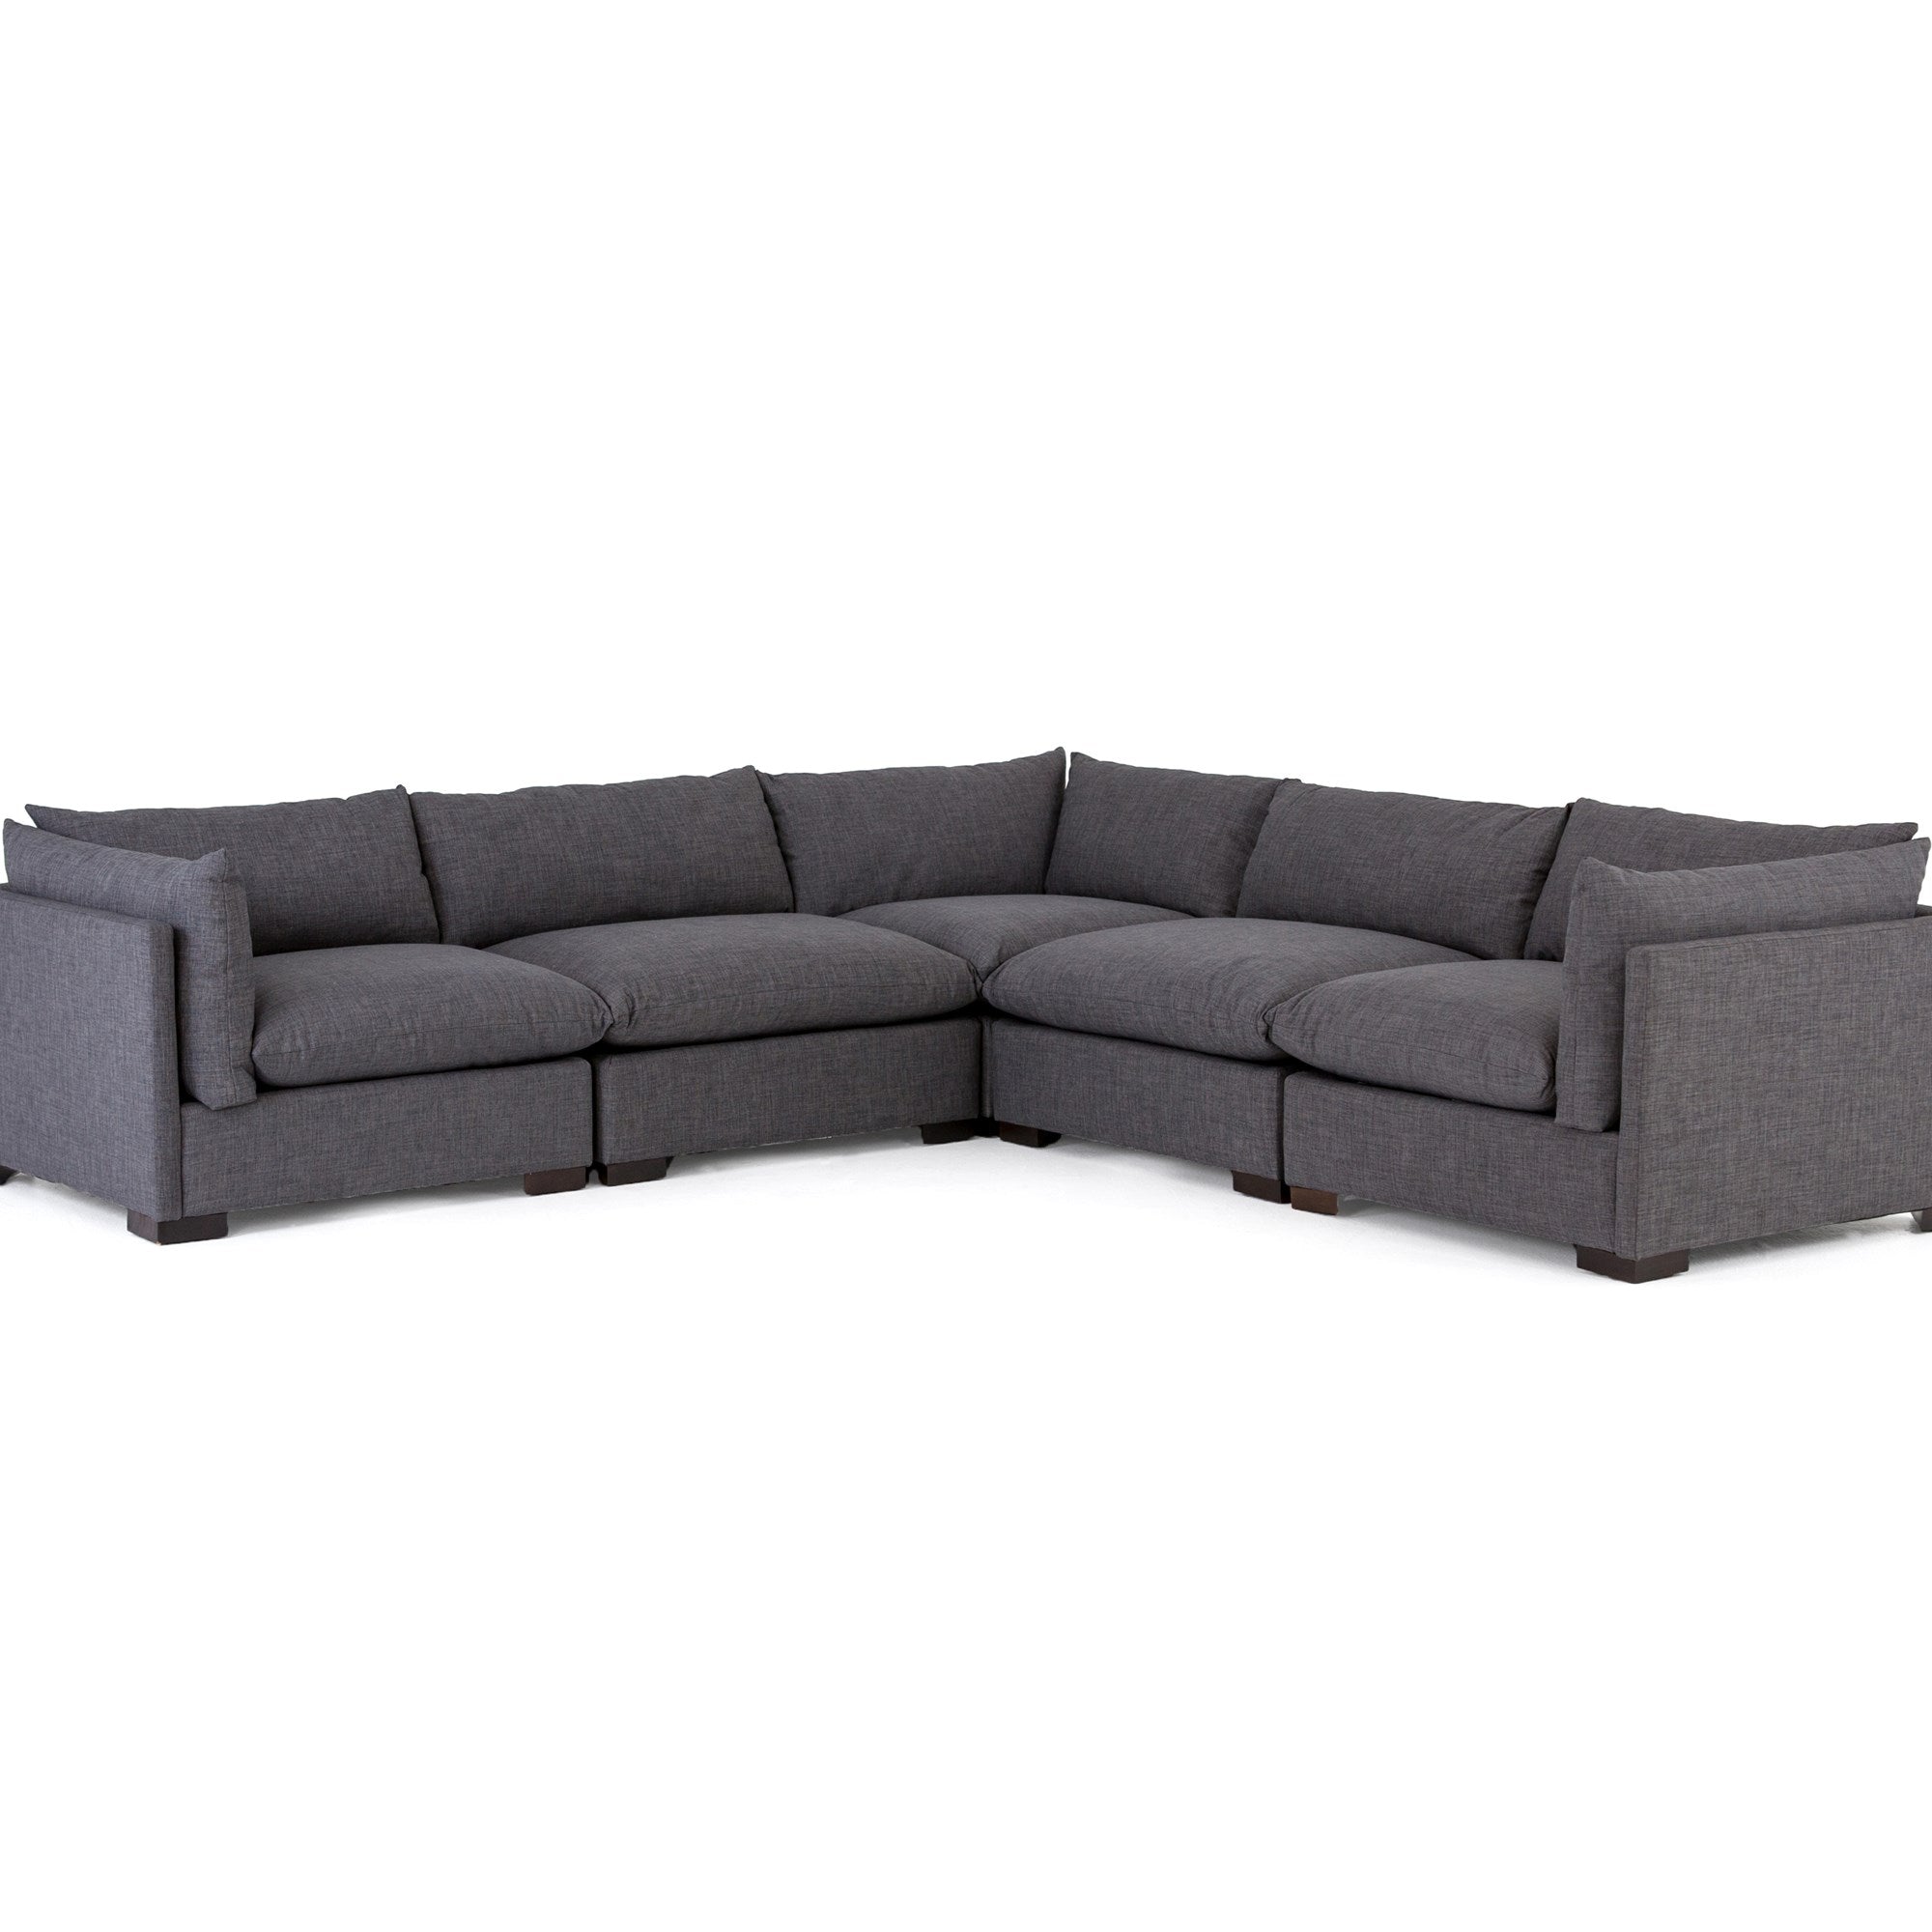 Westwood 5 Piece Sectional